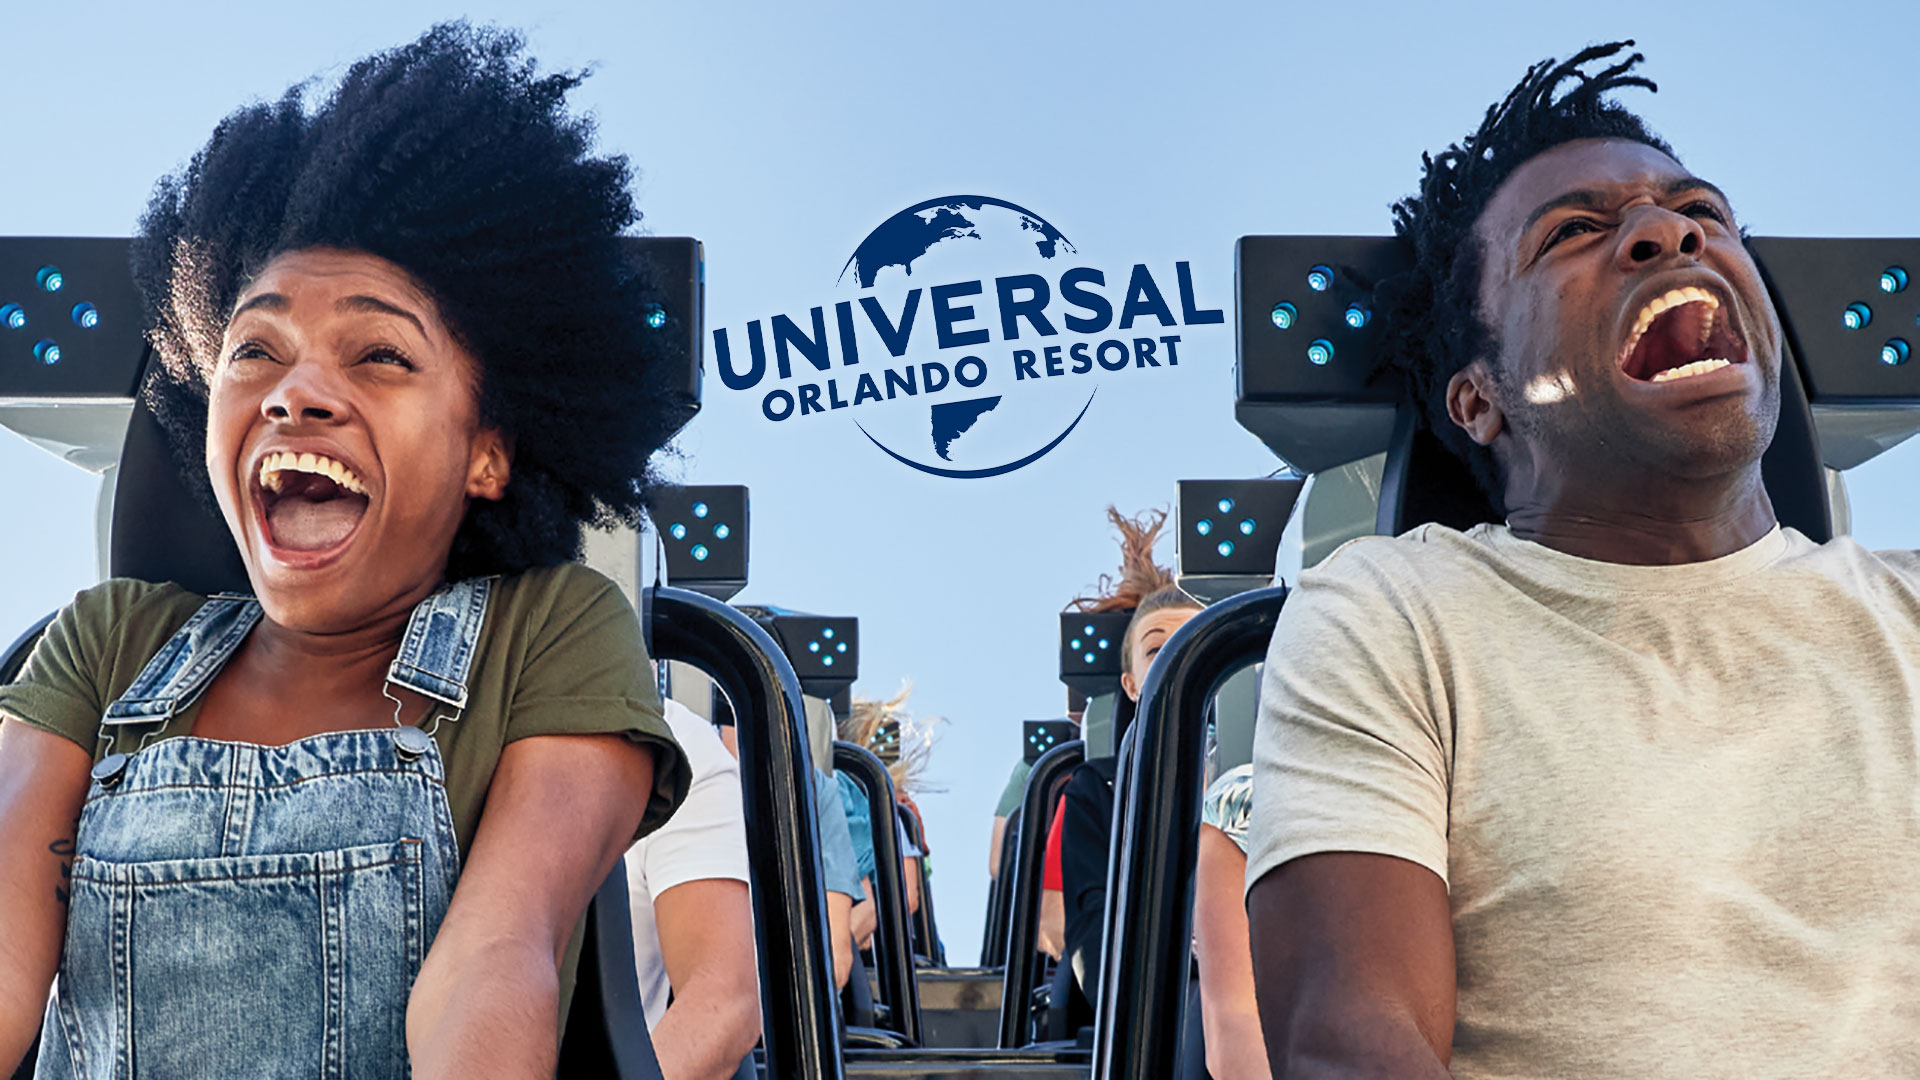 Save Up to 25% on Your Universal Resort Orlando Travel Package